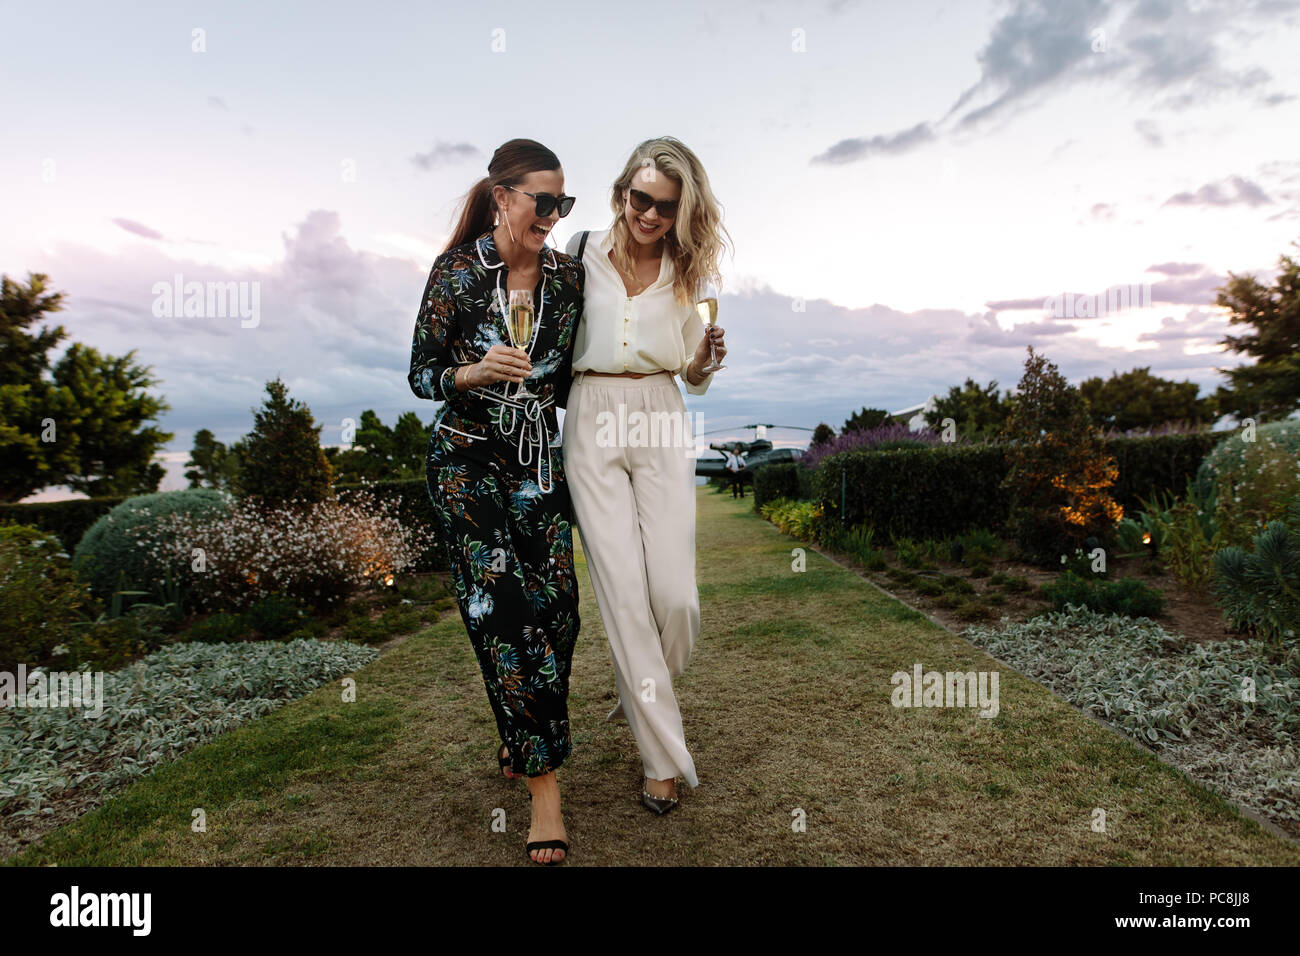 Full length of fashionable women walking together and laughing outdoors. Females friends with a glass of wine enjoying themselves outdoors. Stock Photo